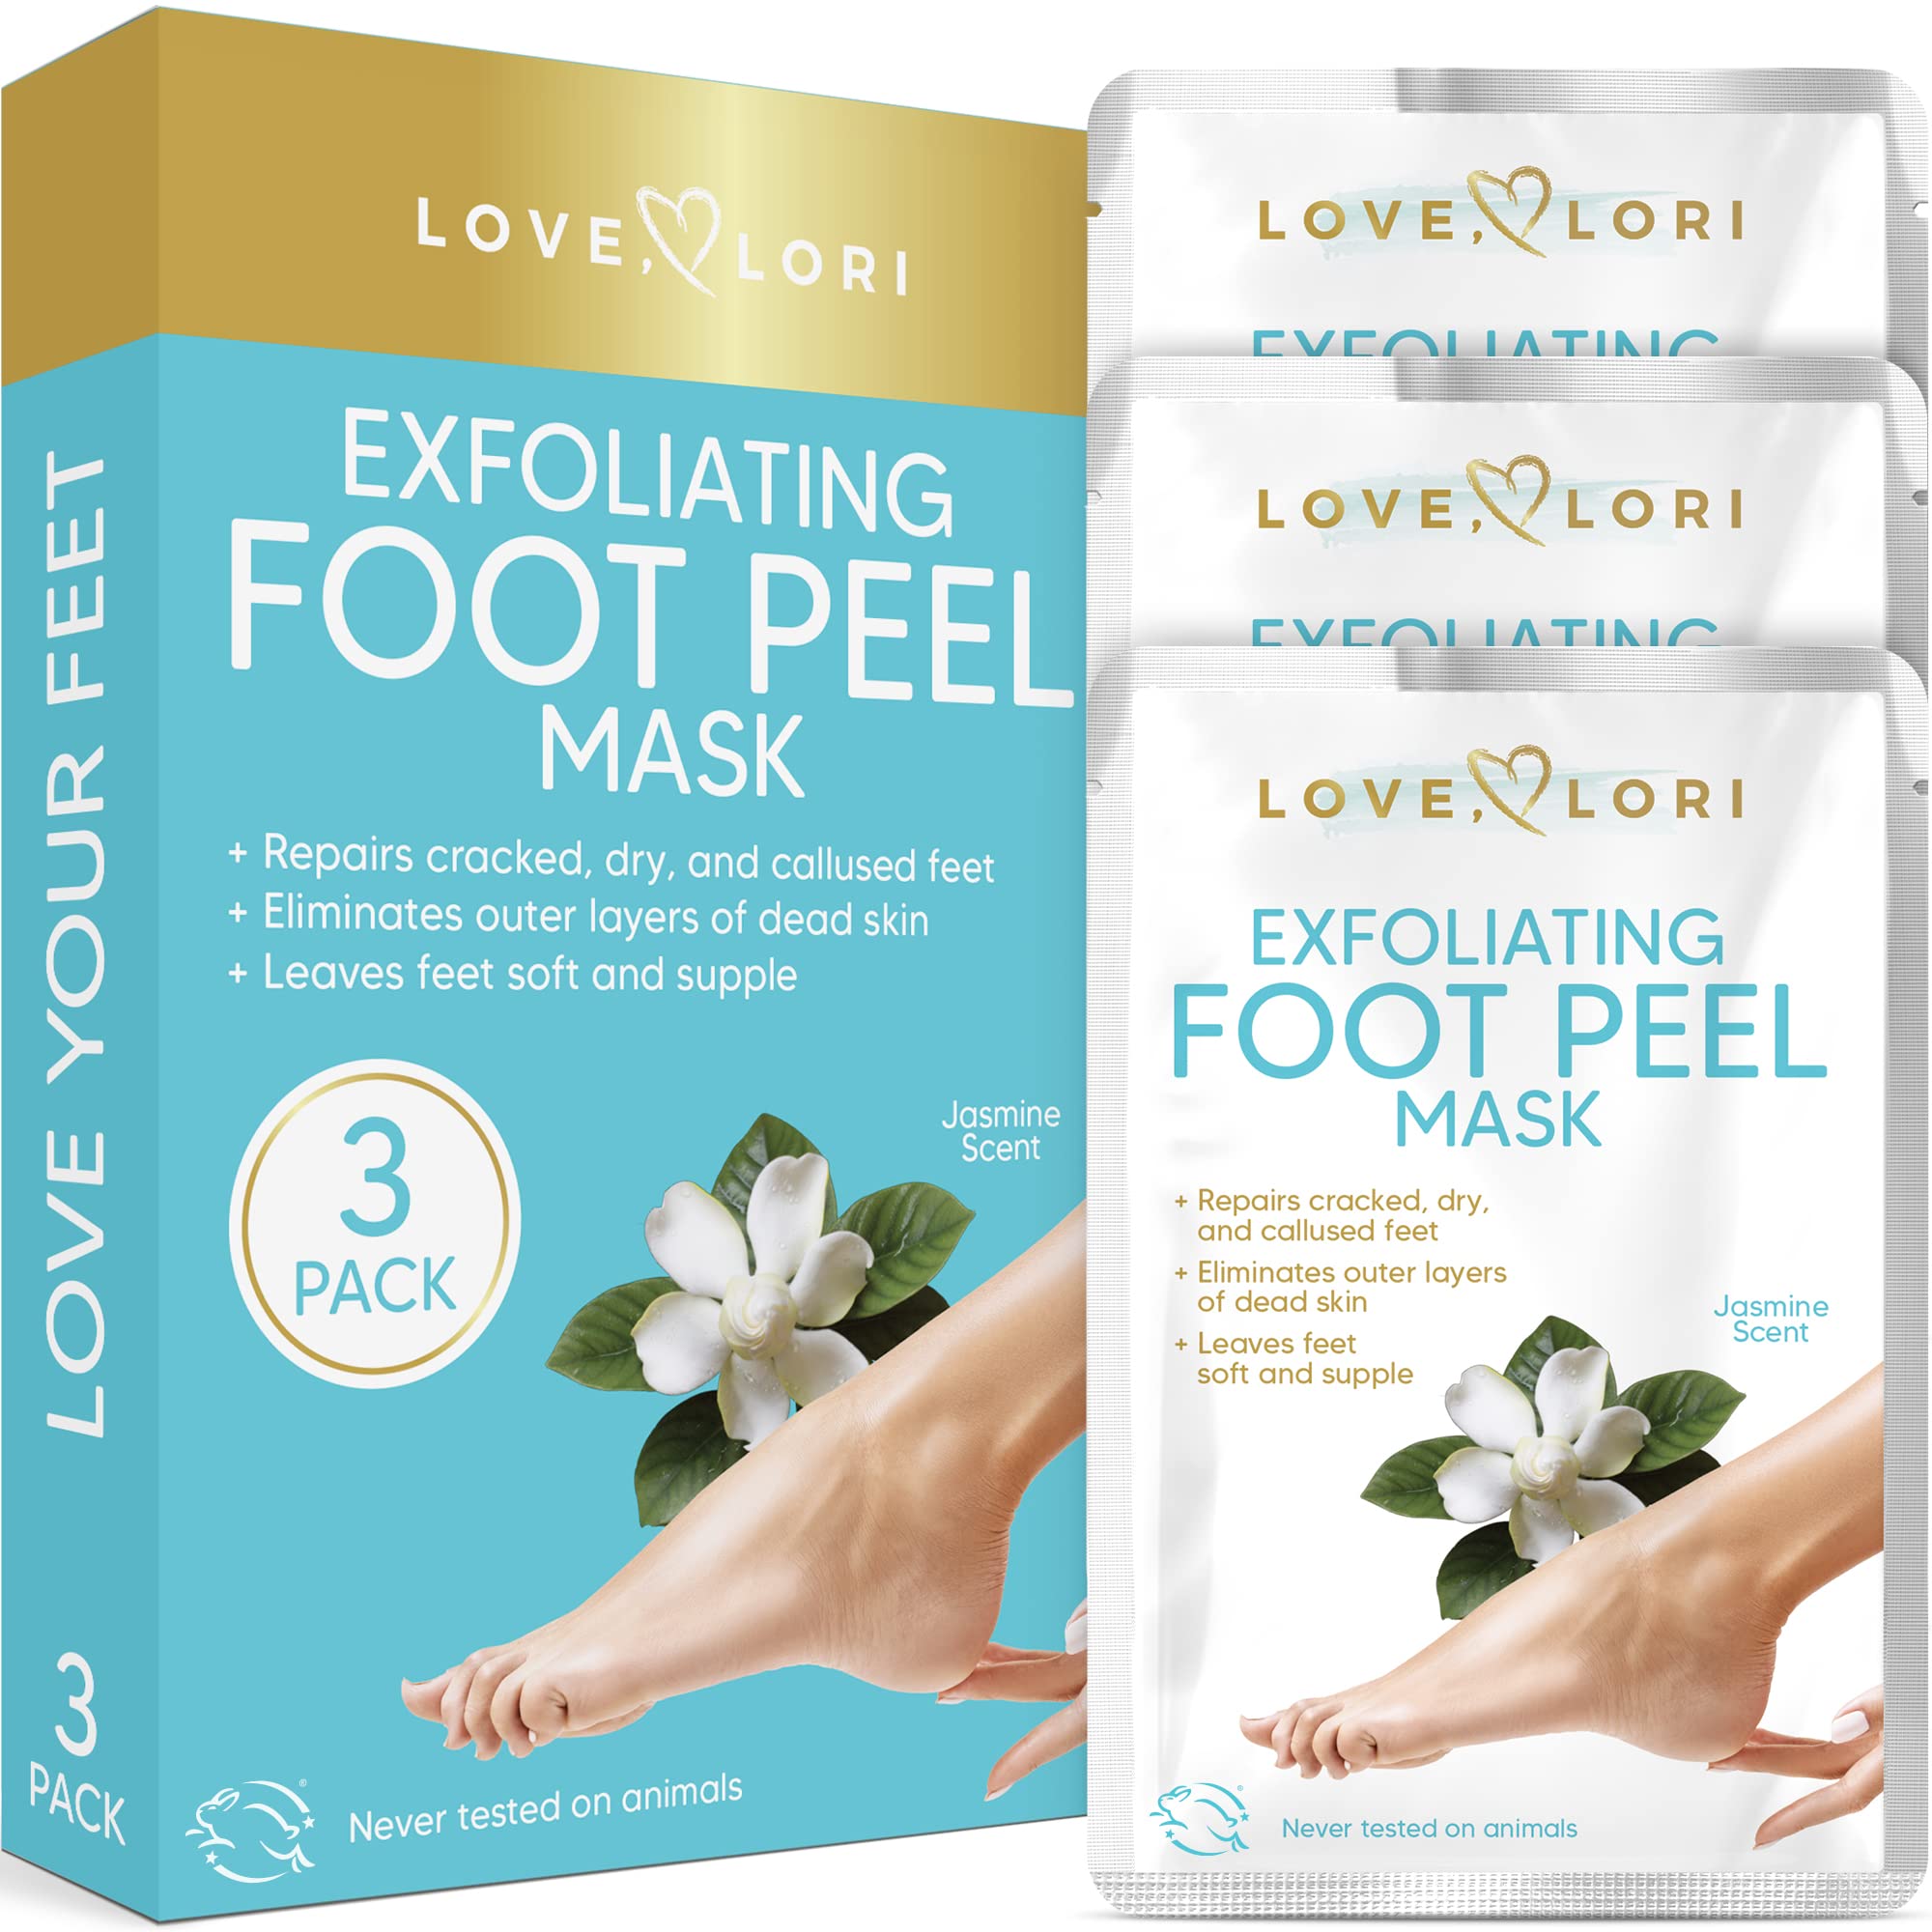 Lavinso Foot Peel Mask for Dry Cracked Feet – 2 Pack Dead Skin Remover and  Callus - Exfoliating Peeling Soft Baby Feet, Original Scent